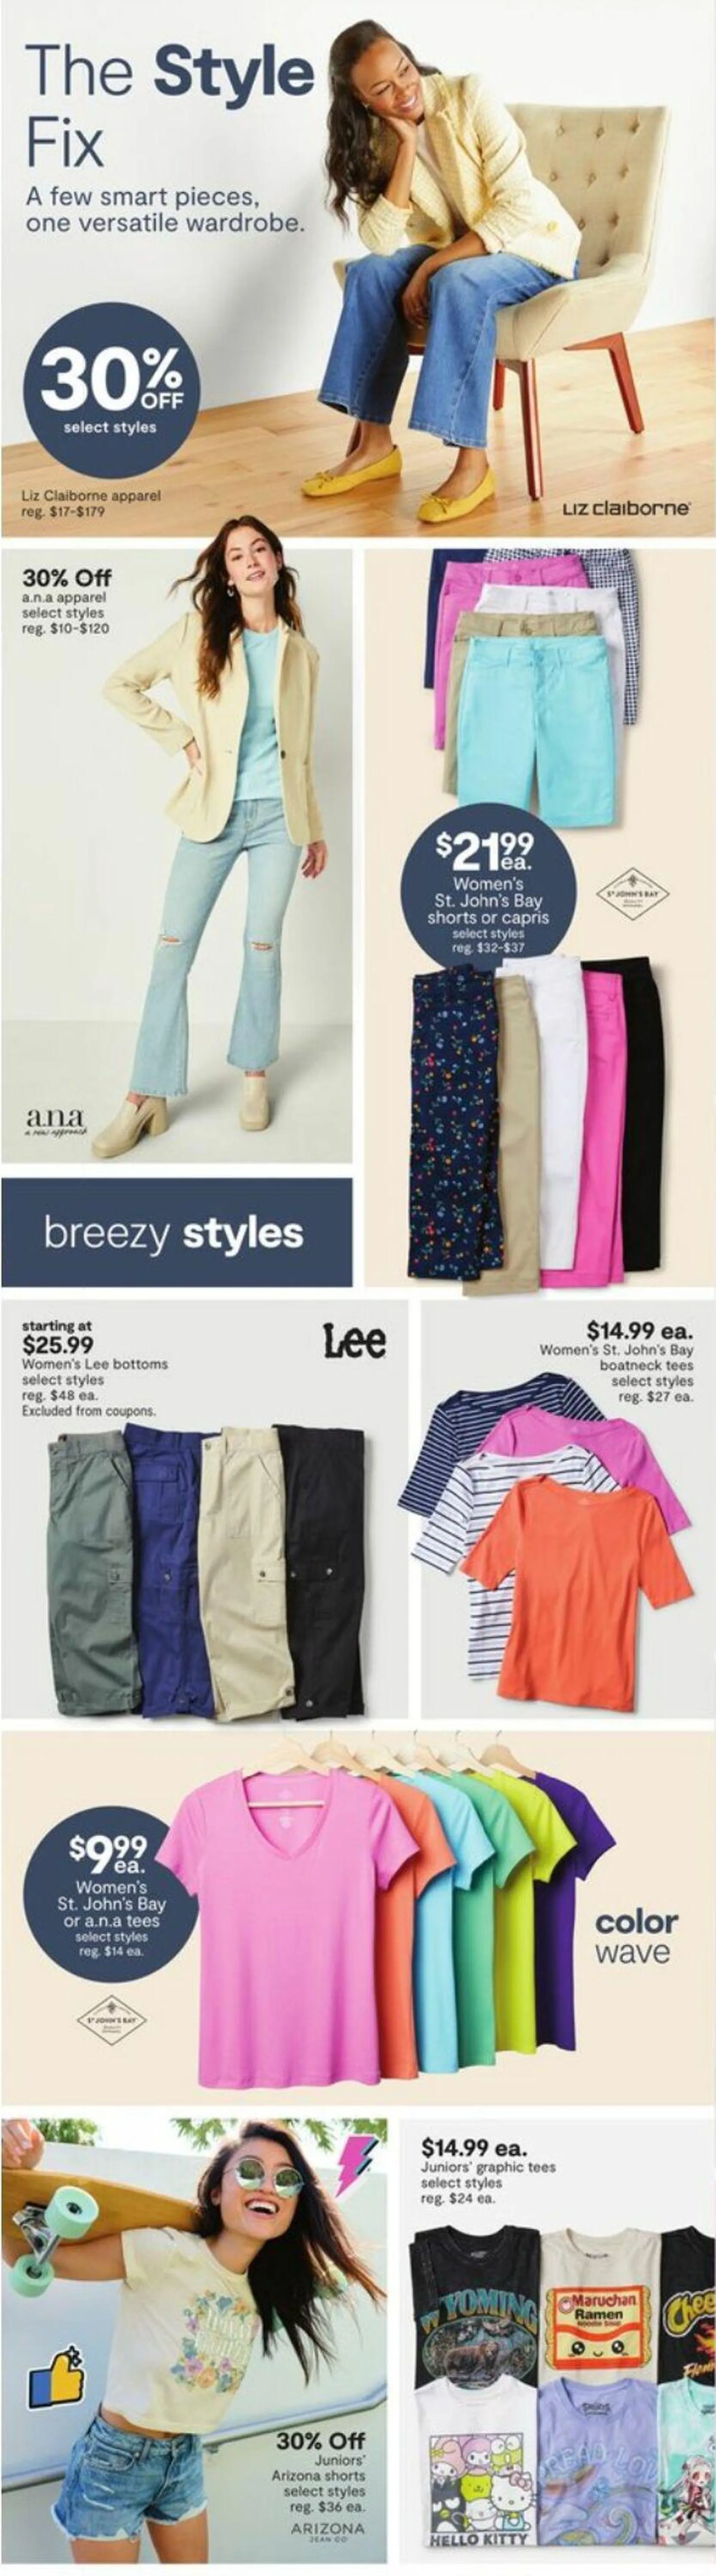 JCPenney Current weekly ad - 2